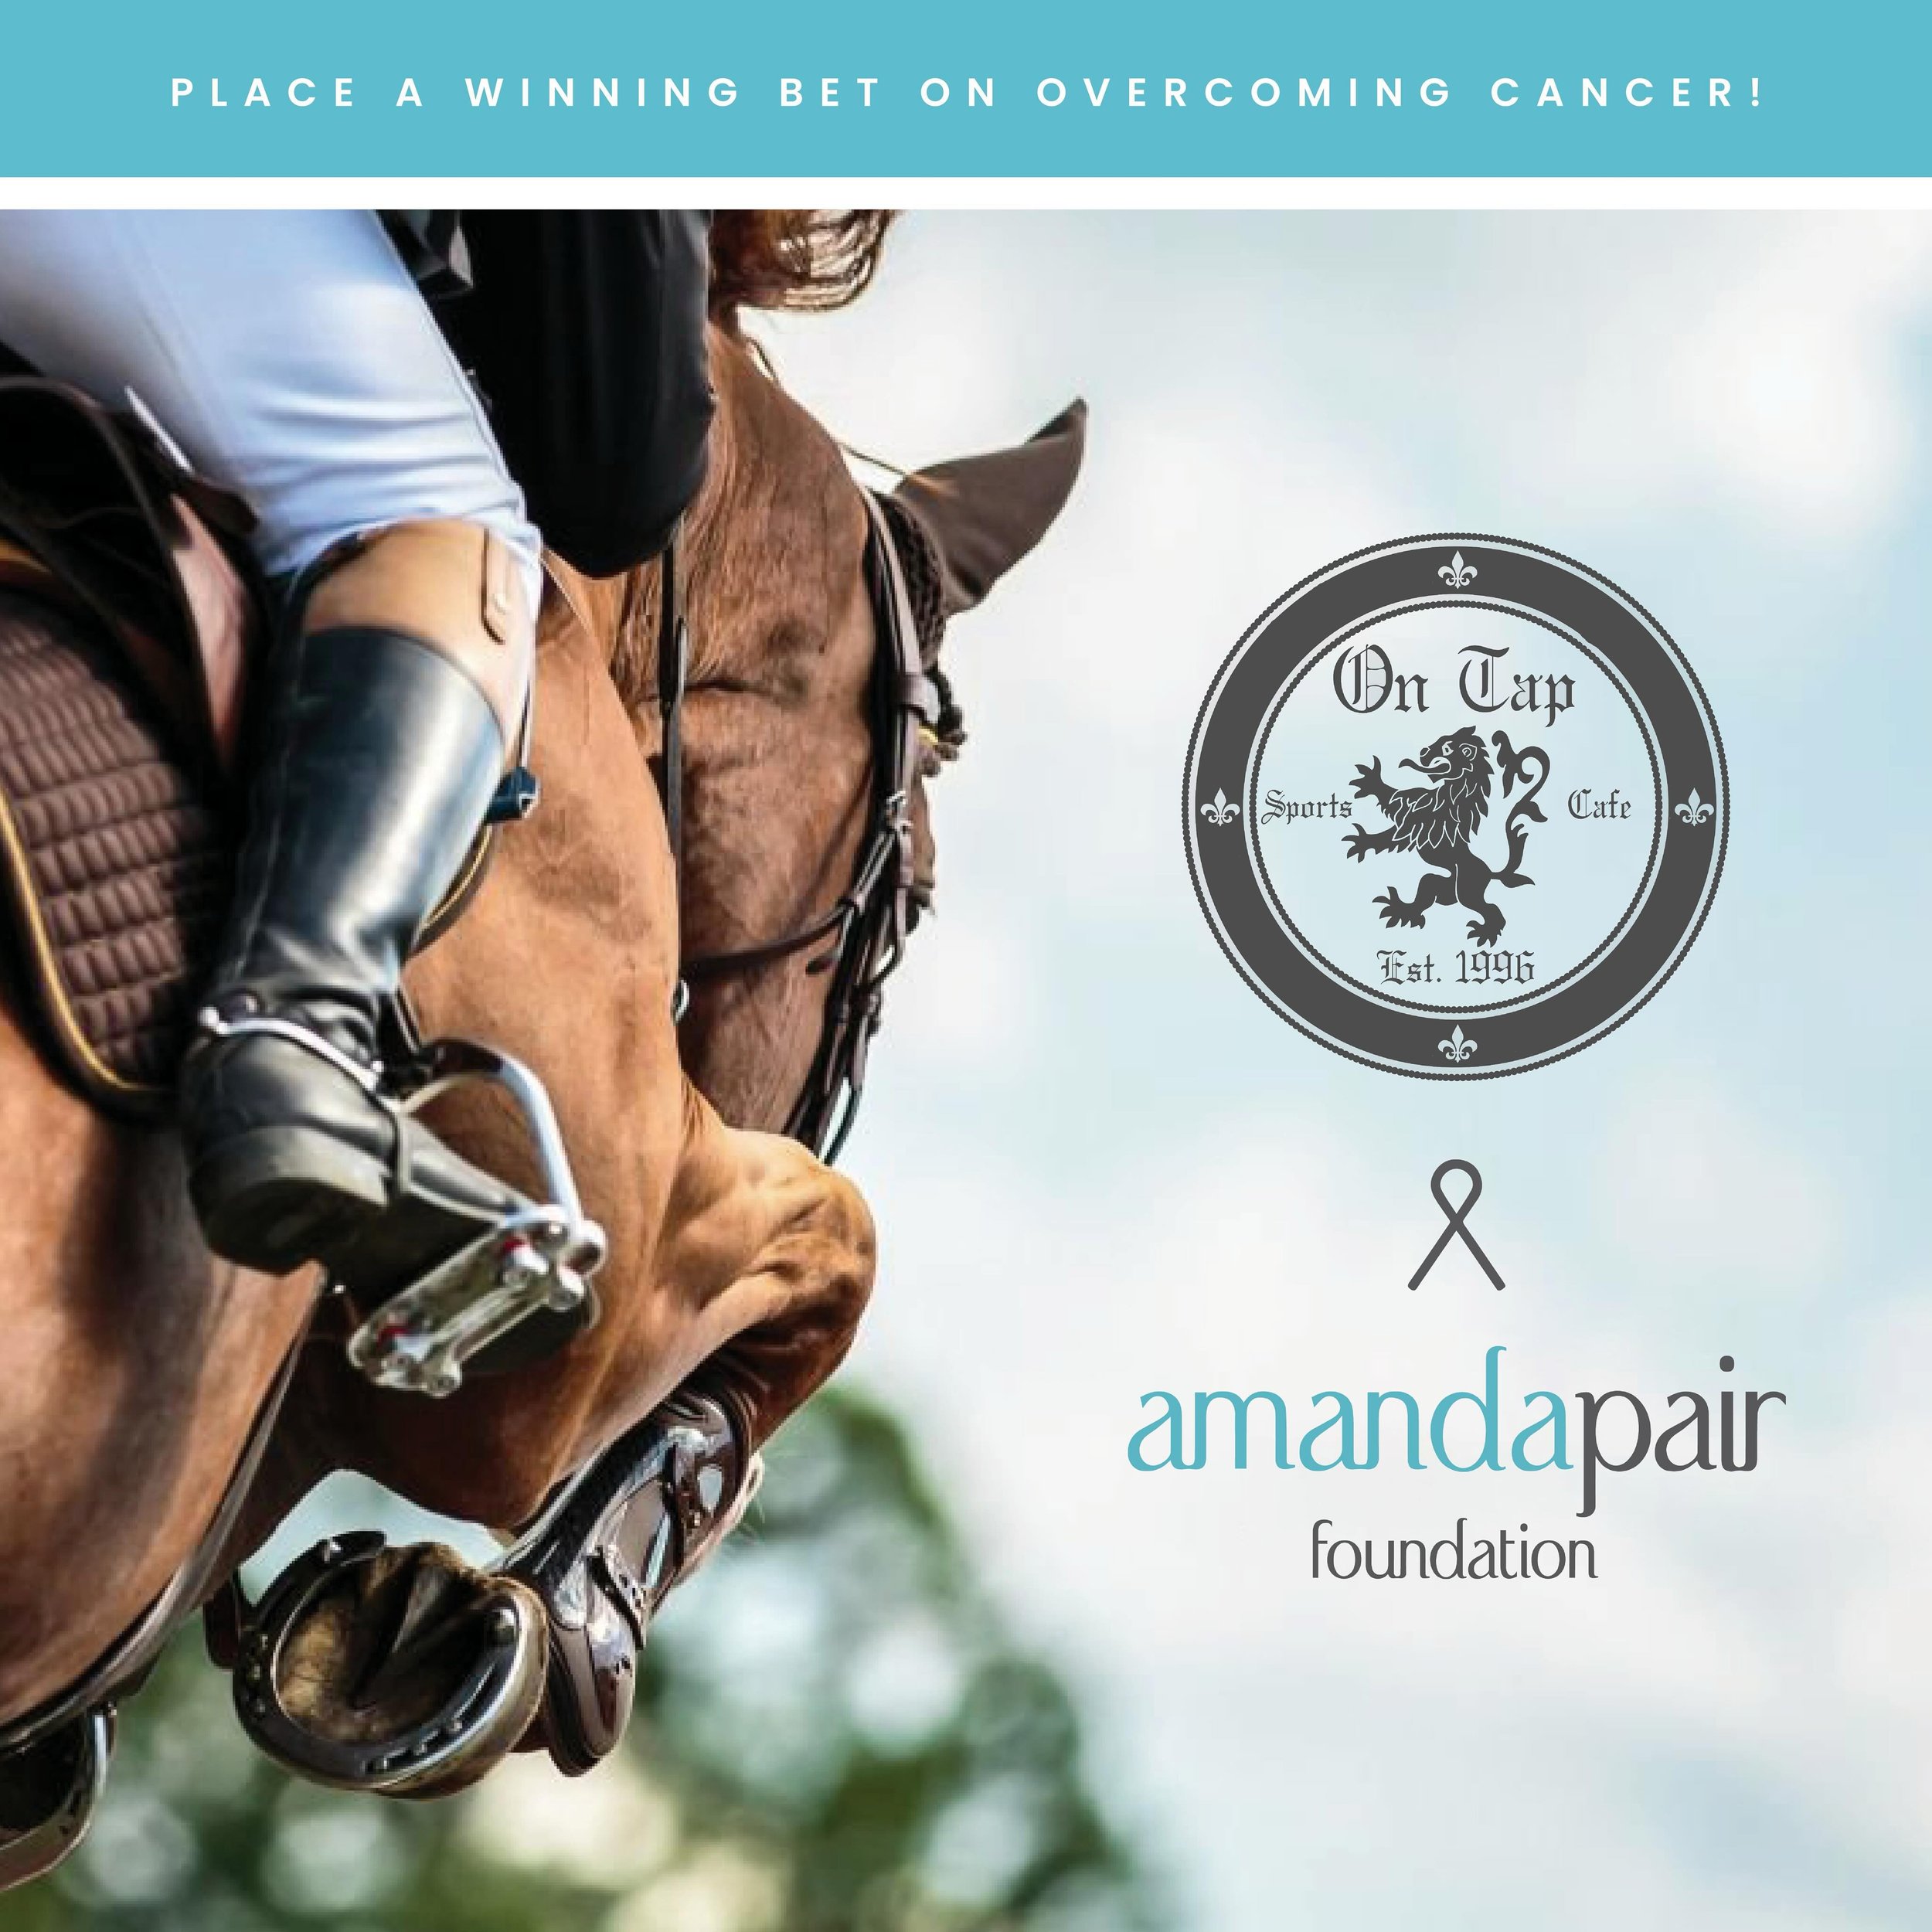 Join us for a Derby Party at On Tap benefitting the Amanda Pair Foundation!

Come enjoy food and drinks Saturday, May 4 from 2-7pm in the bourbon room, featuring your choice of a bourbon or wine tasting from 2:30-4:30pm. 

Adult tickets for food and 